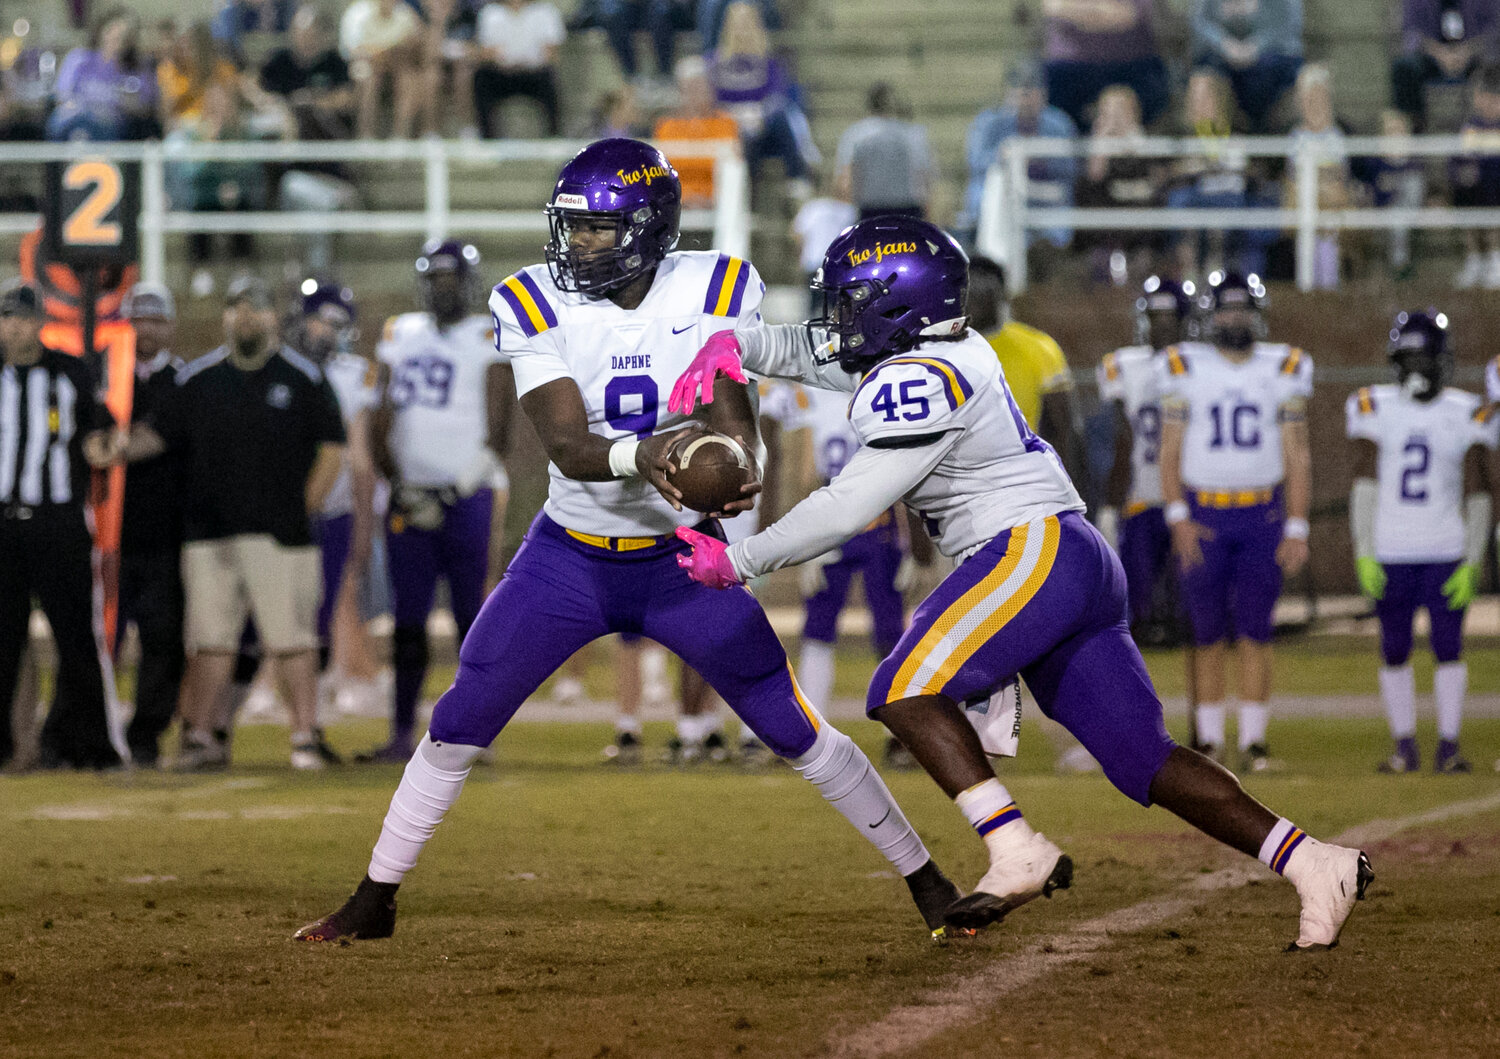 Daphne senior Nick Clark (45) goes through an exchange with quarterback Jamar Malone (9) during the Trojans’ region game against the Fairhope Pirates Friday night on W.C. Majors Field. The running back was recently recognized as one of six players from Baldwin County named to the North-South All-Star Football Classic set for December in Mobile.